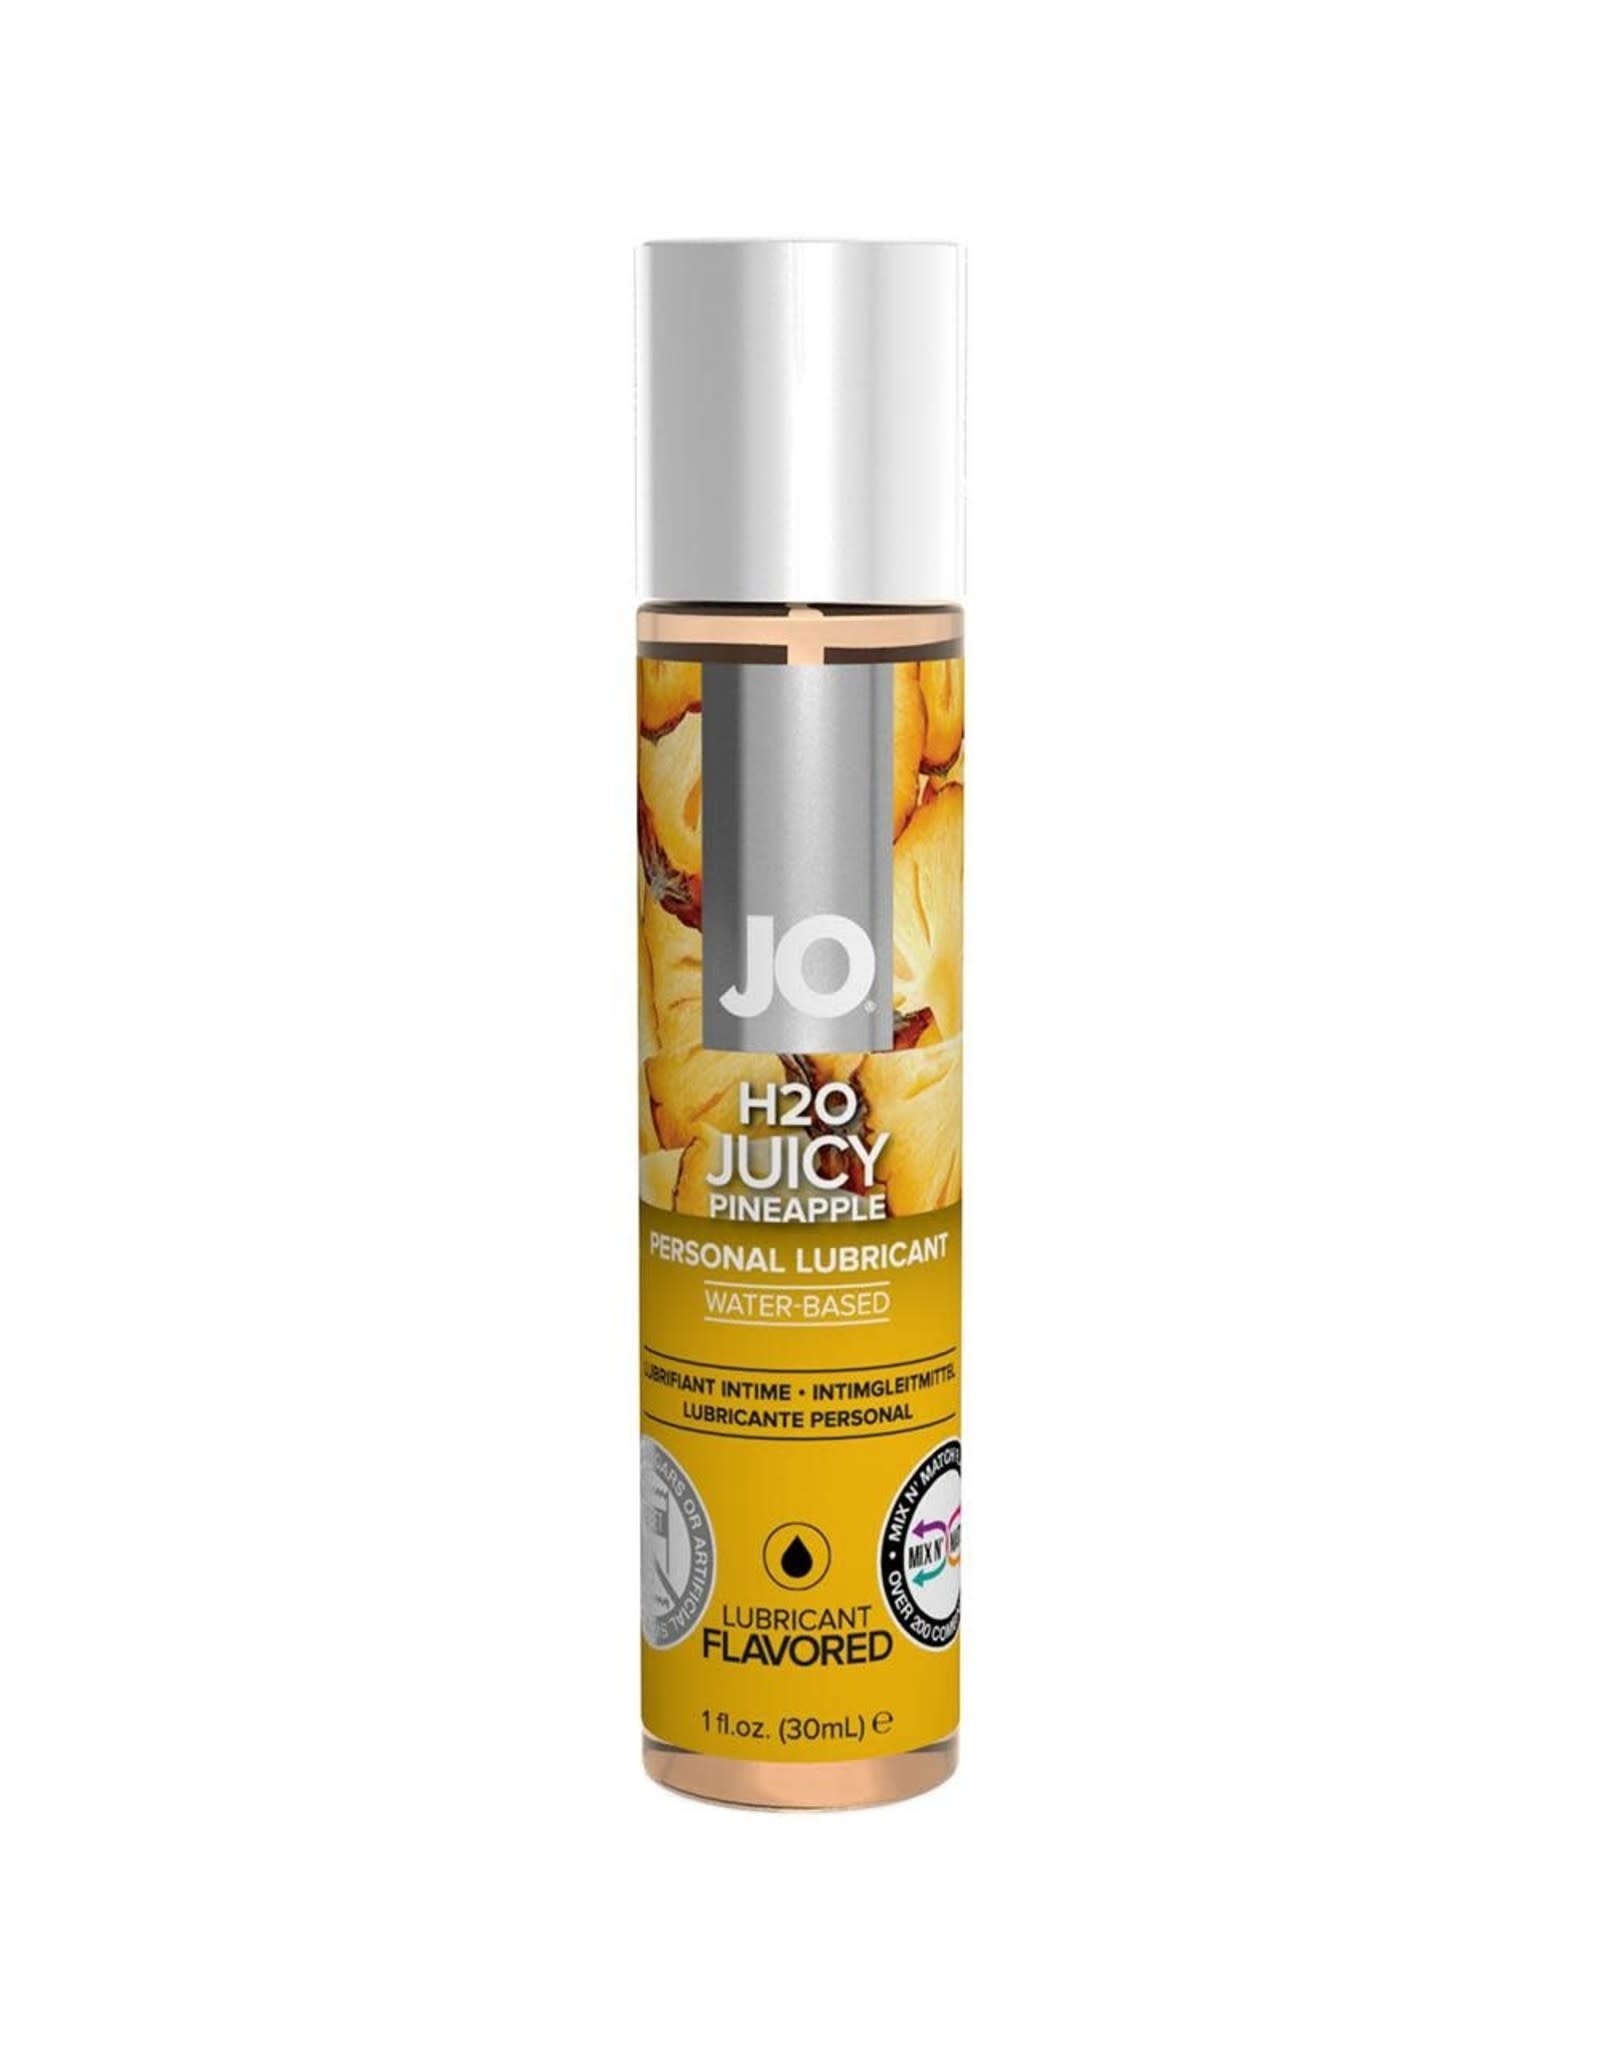 SYSTEM JO JO - H2O - FLAVOURED LUBRICANT - JUICY PINEAPPLE - 1 oz